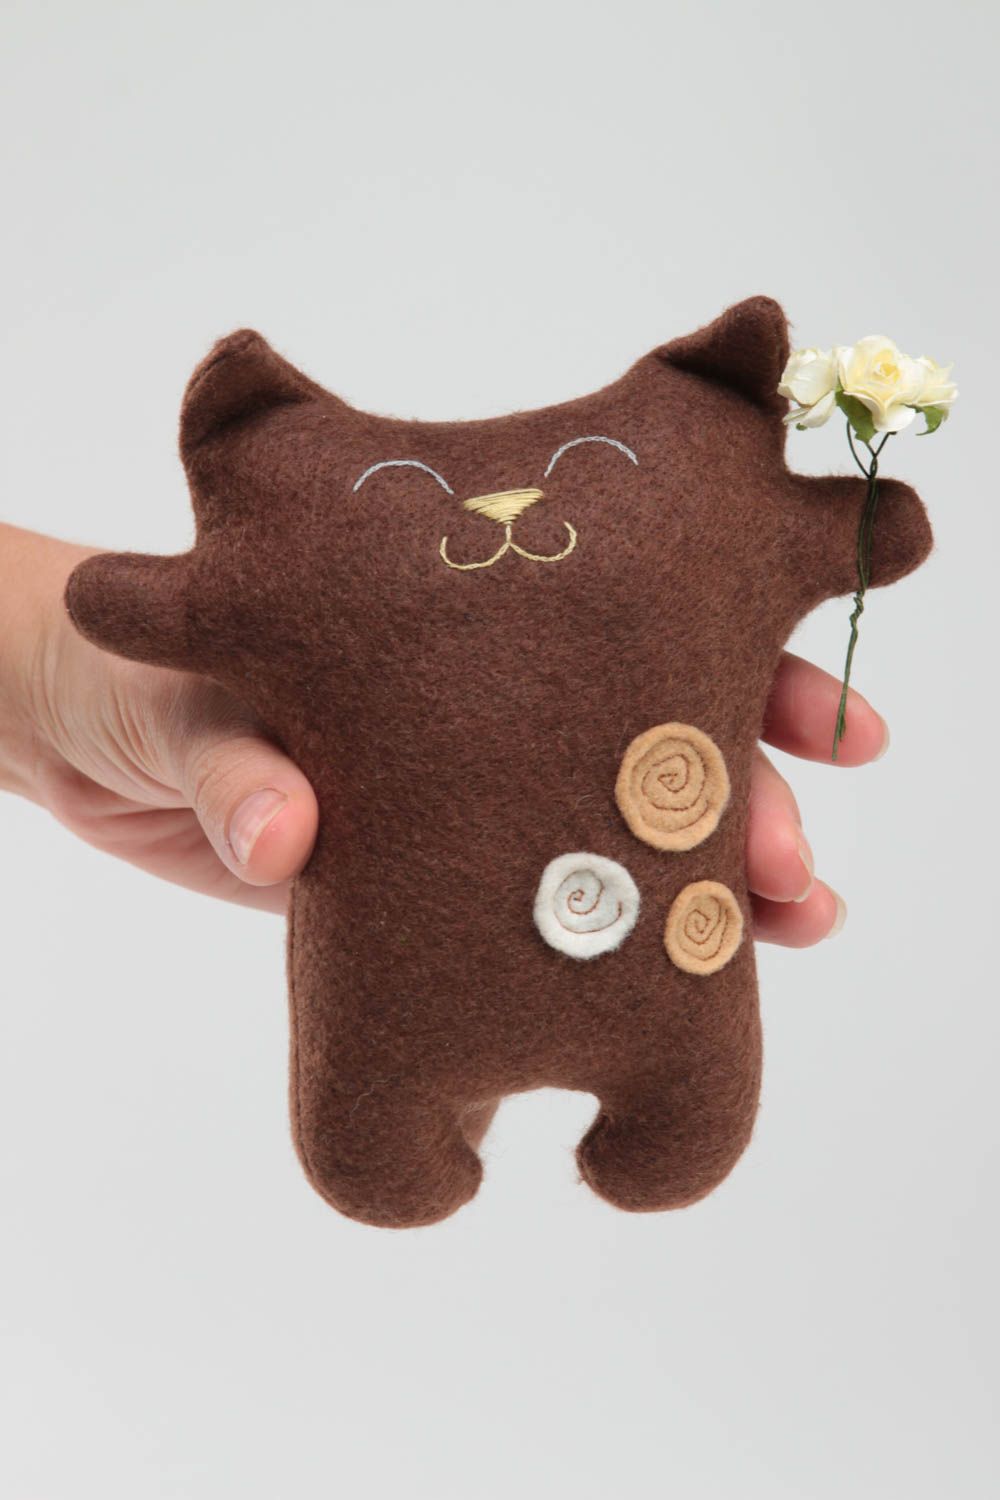 Handmade brown soft small toy made of felt in shape of cat with flowers photo 5